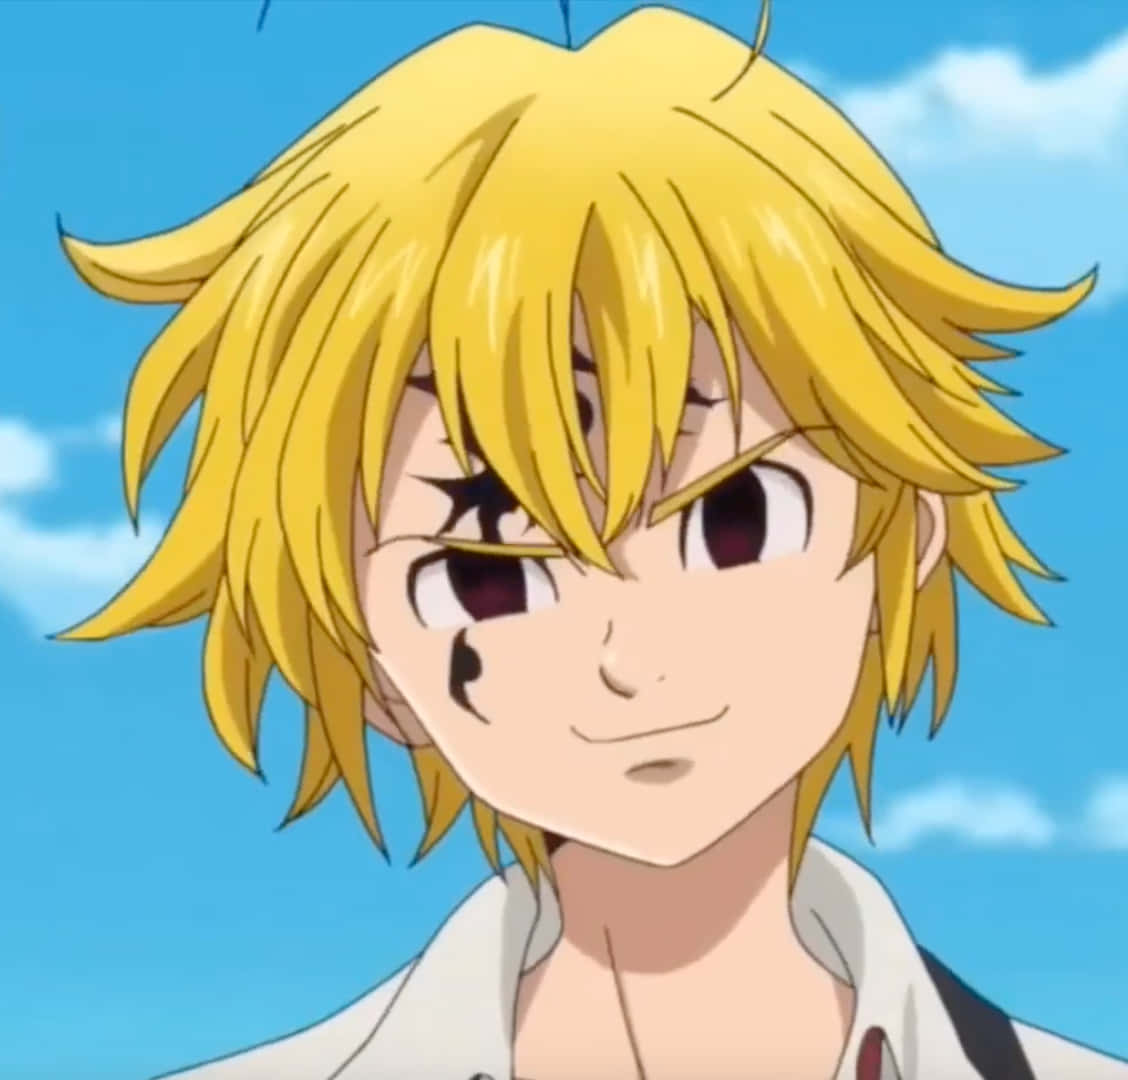 Meliodas, the main protagonist of the series Seven Deadly Sins